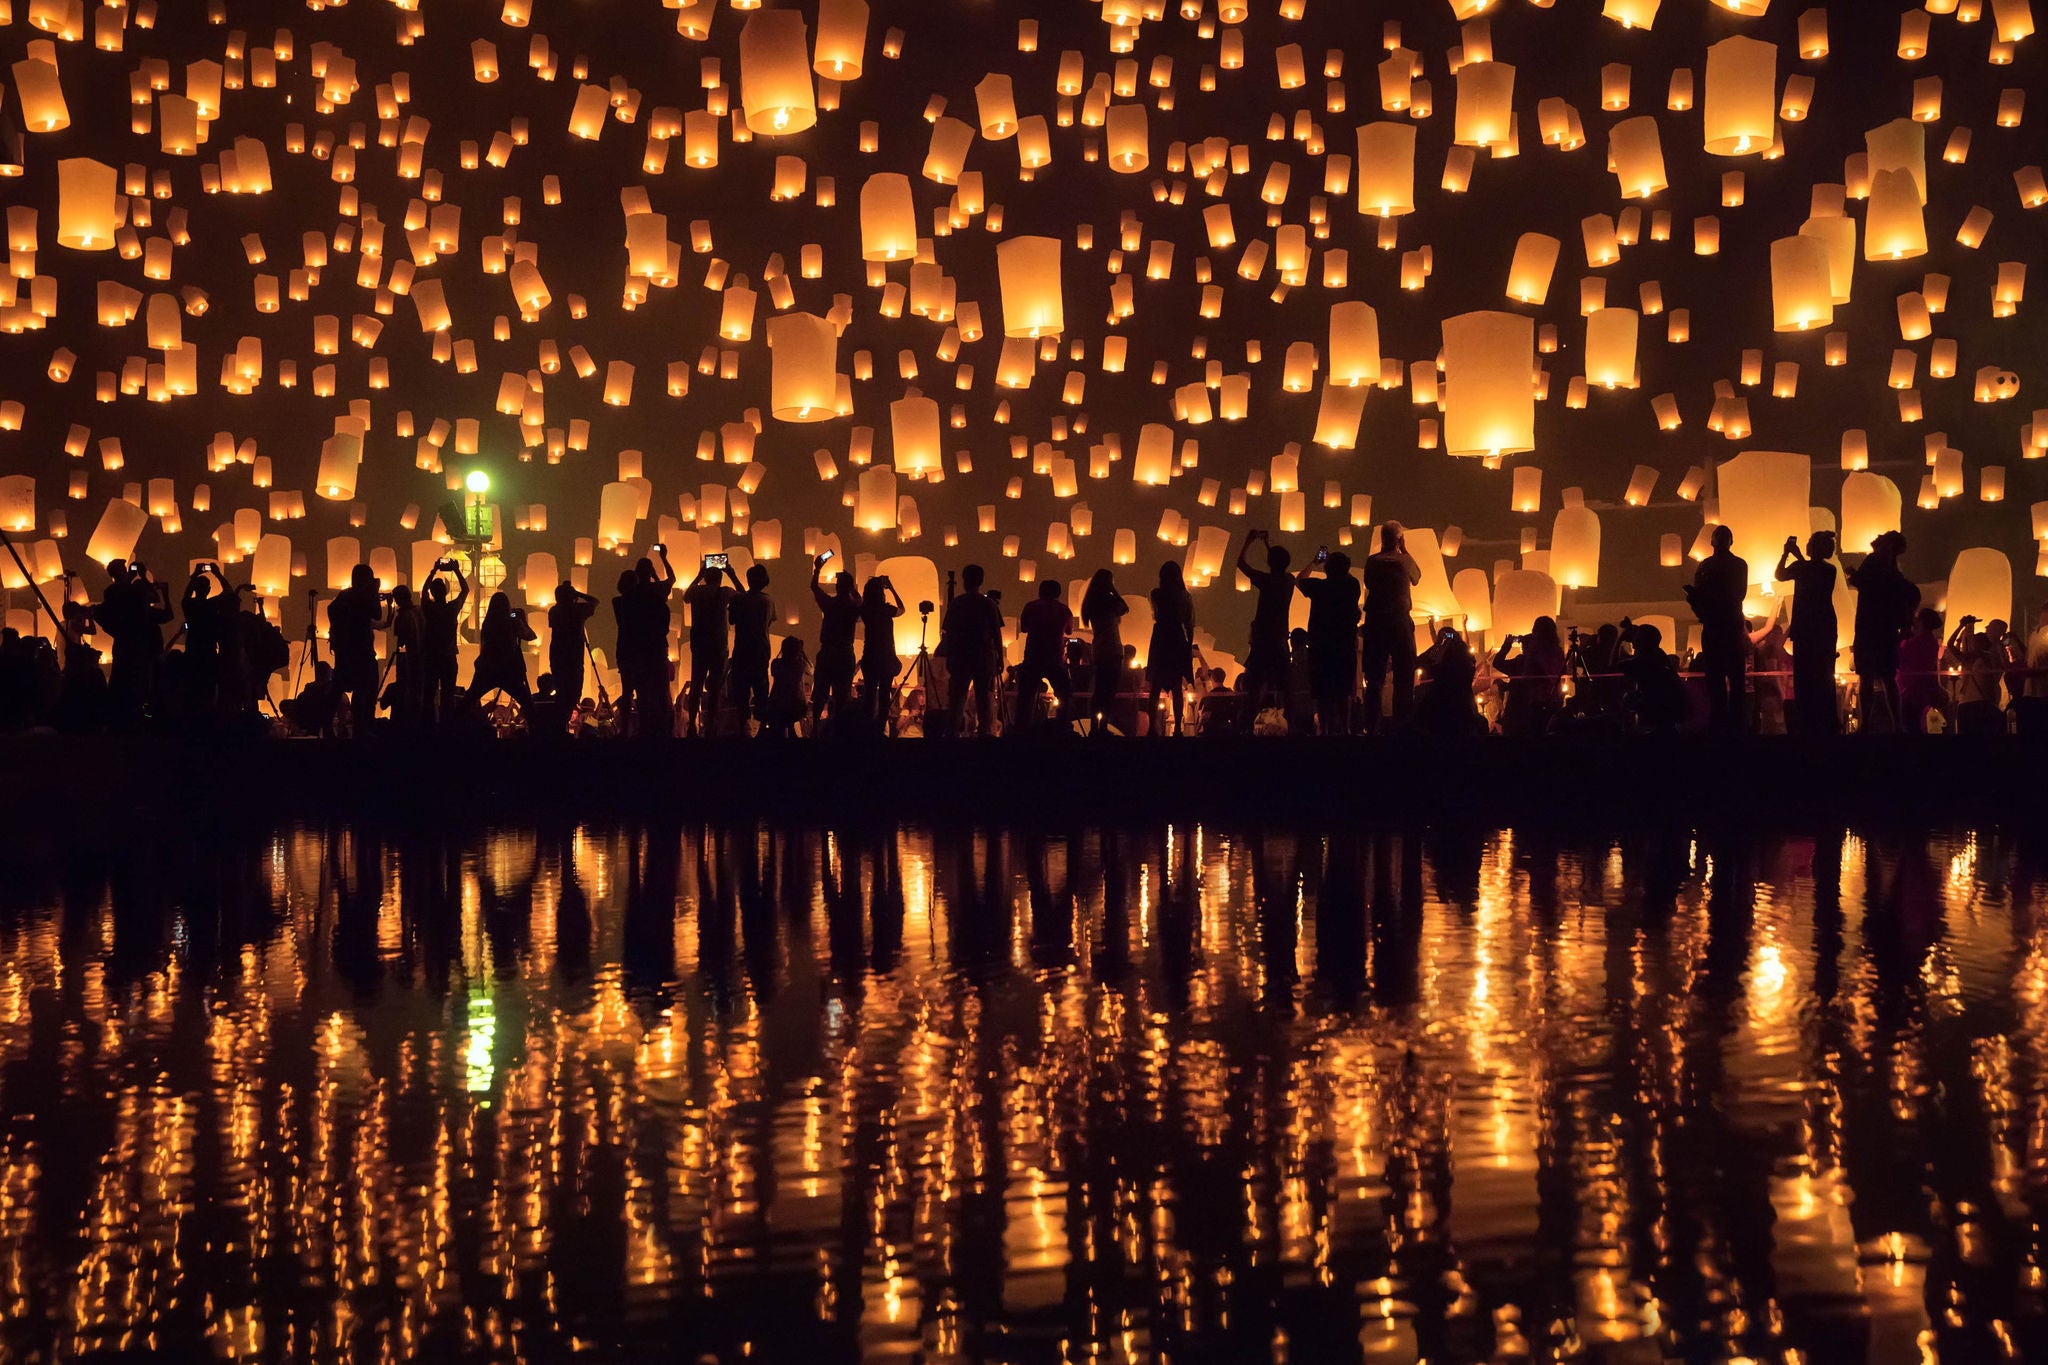 People releasing lantern at a festival